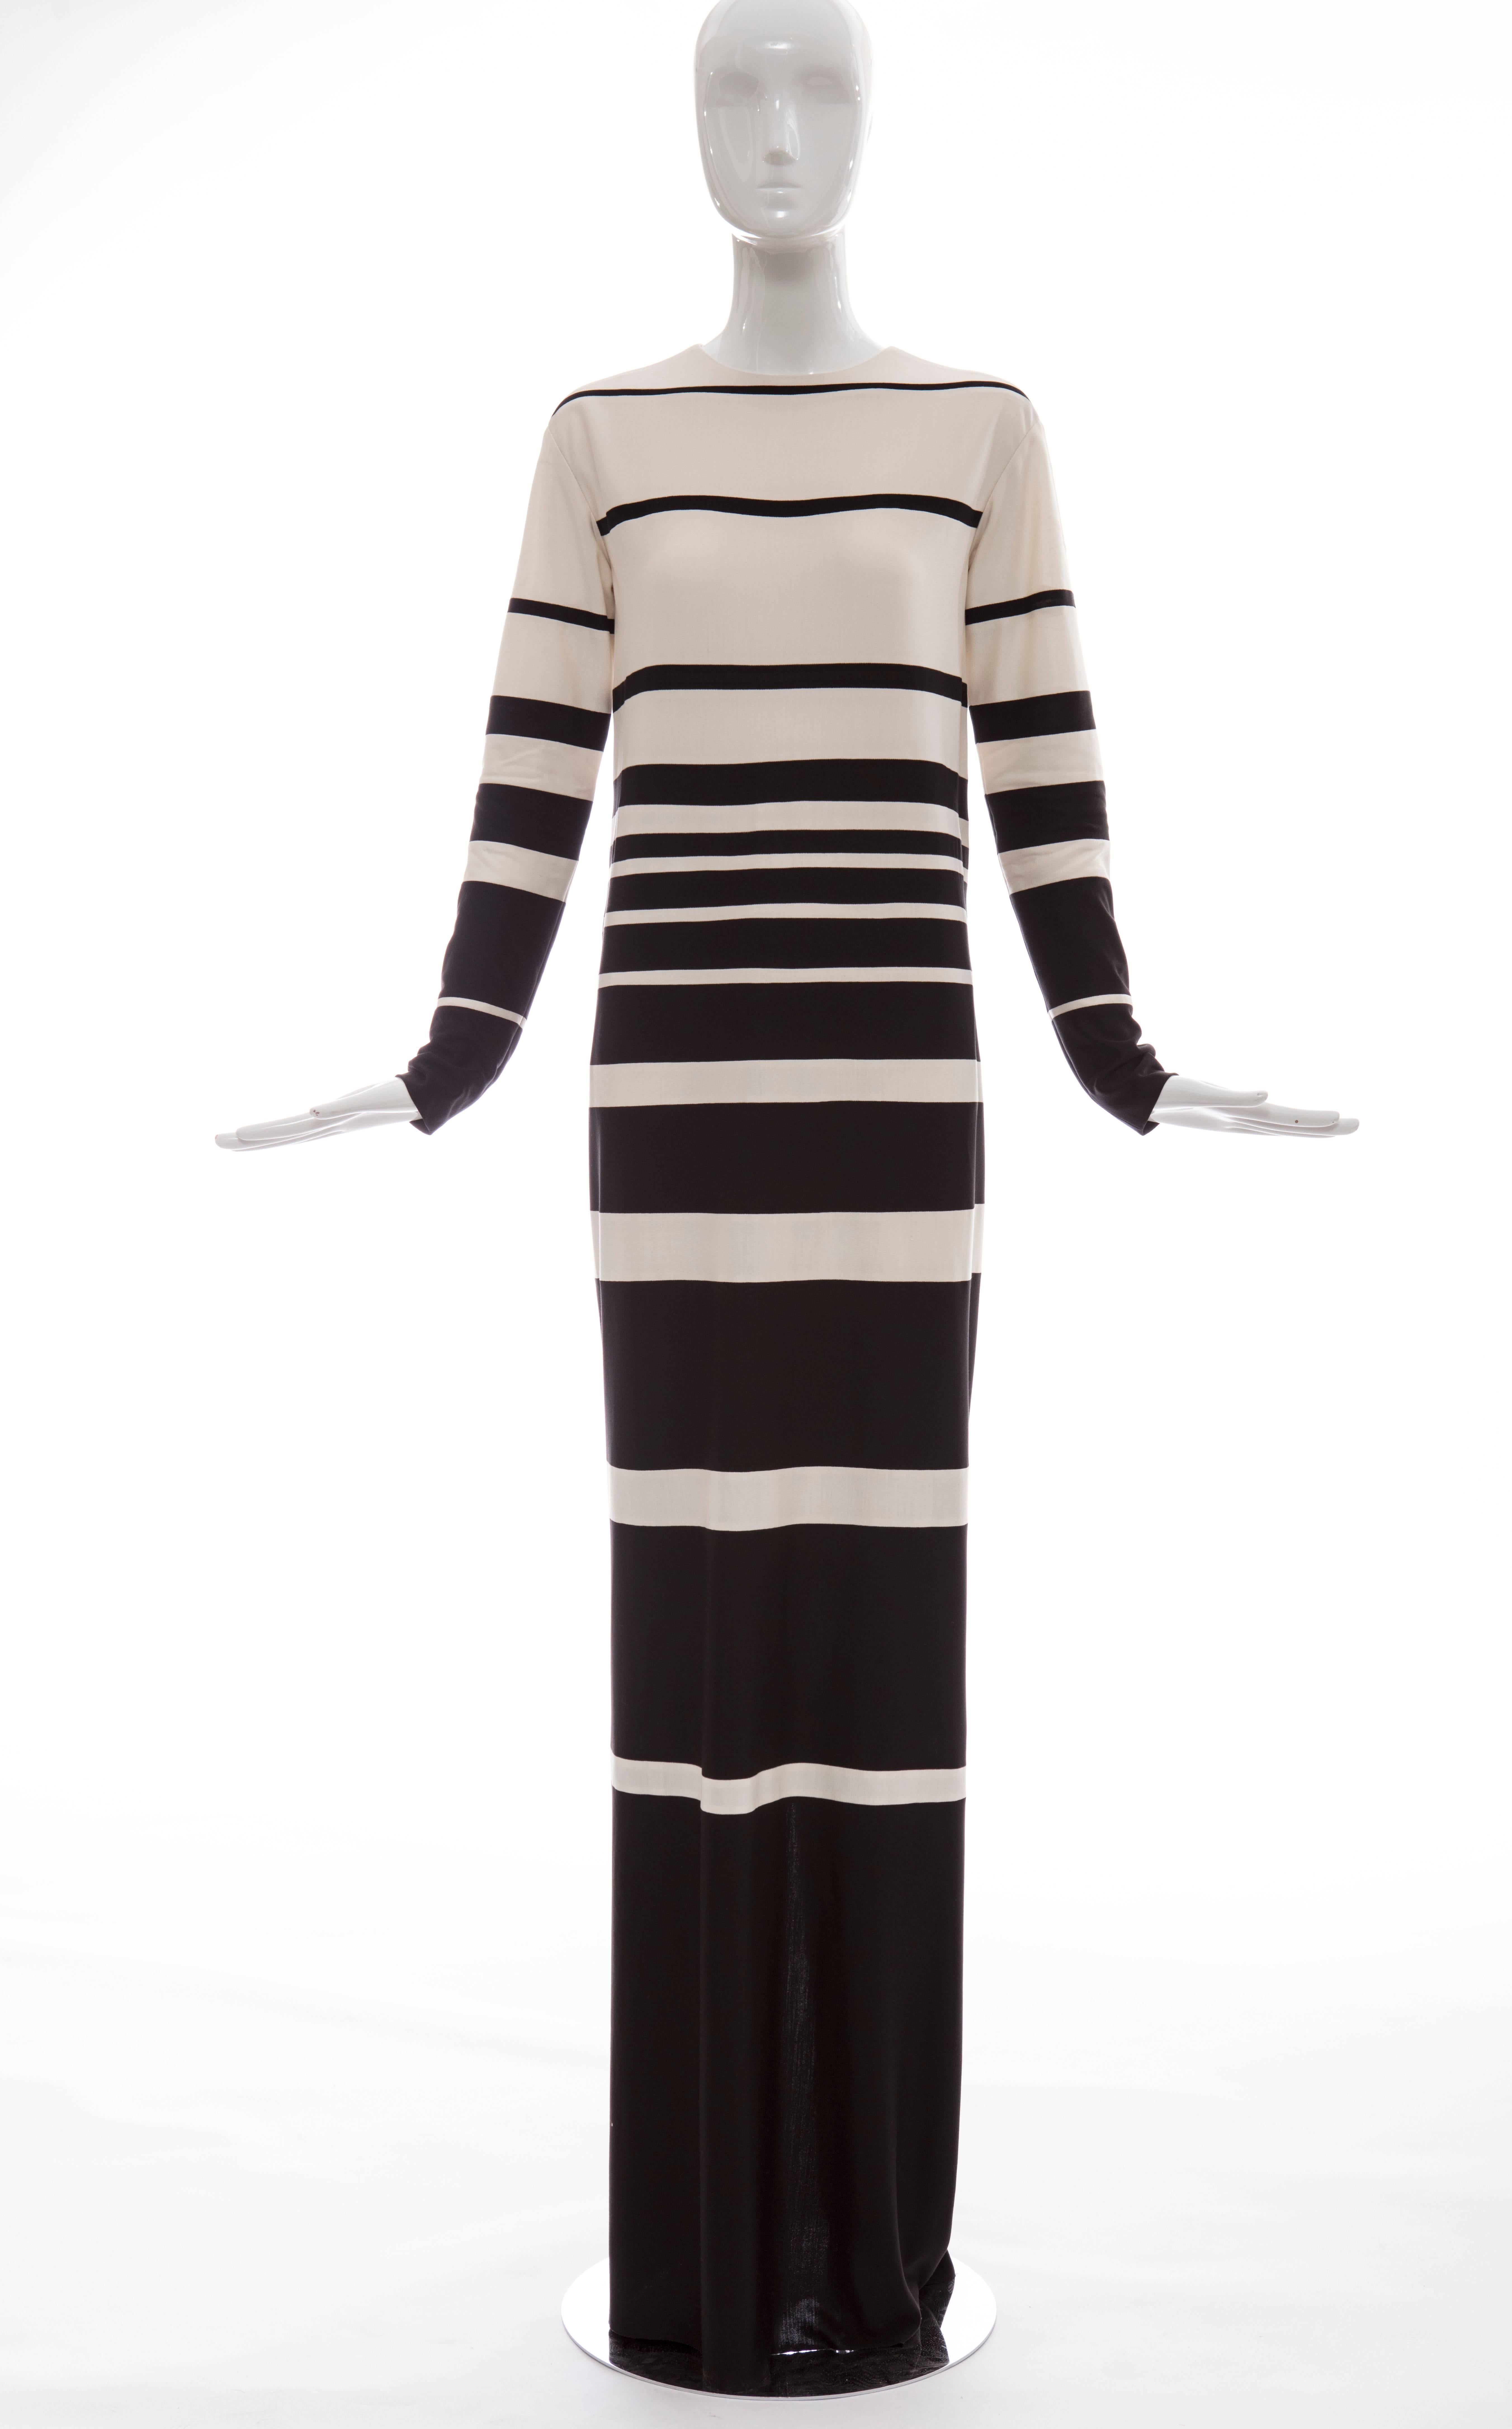 Marc Jacobs, Spring 2013 silk crew neck maxi dress with ascending stripe pattern and concealed zip closure at back.

US 4

Bust 37”, Waist 37”, Hip 38”, Length 65”

